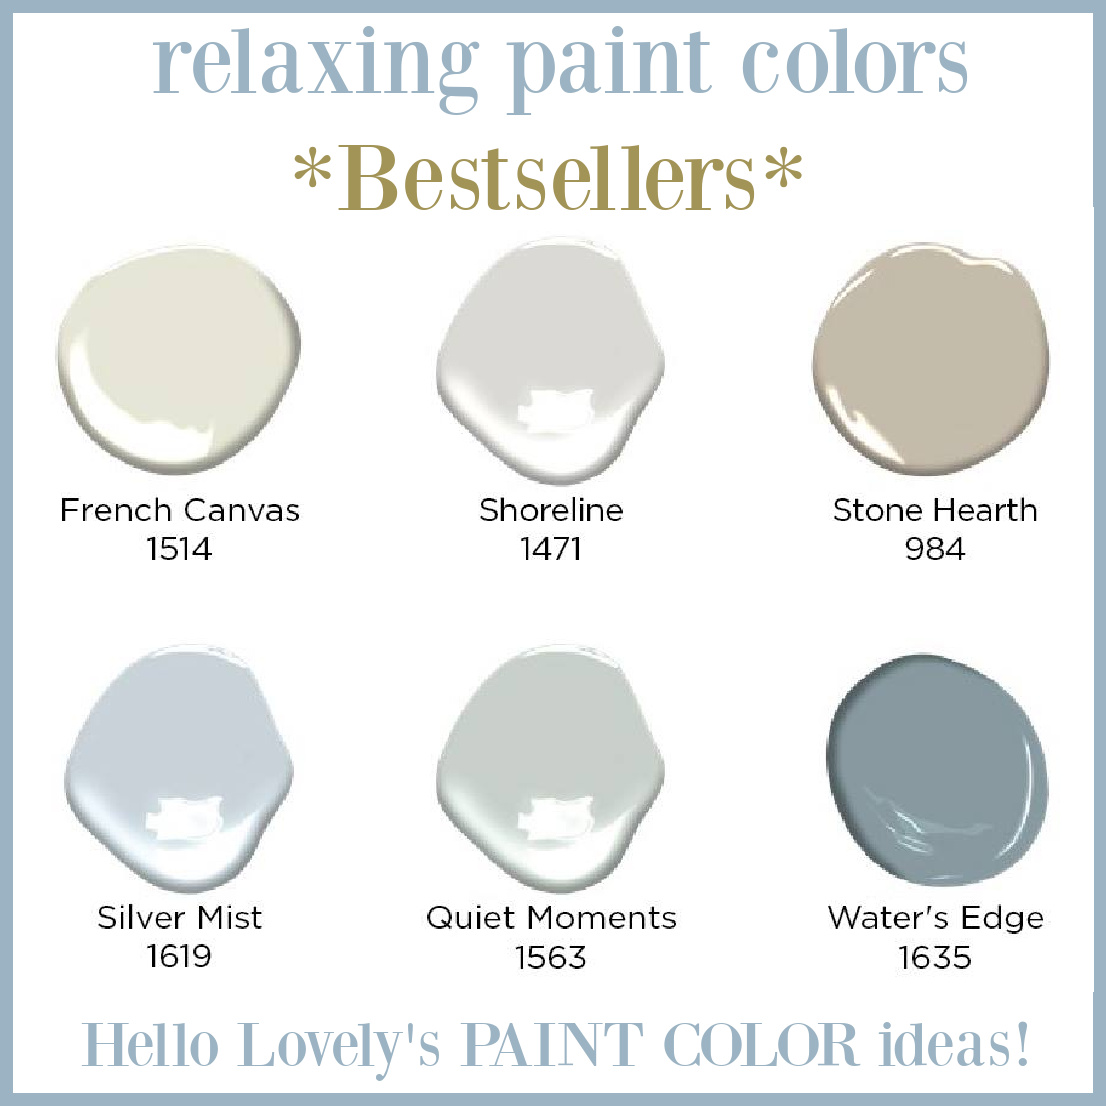 Try the most relaxing paint colors - shared on Hello Lovely Studio. #calmpaintcolors #benjaminmoorepaintcolors #bestsellingpaintcolors